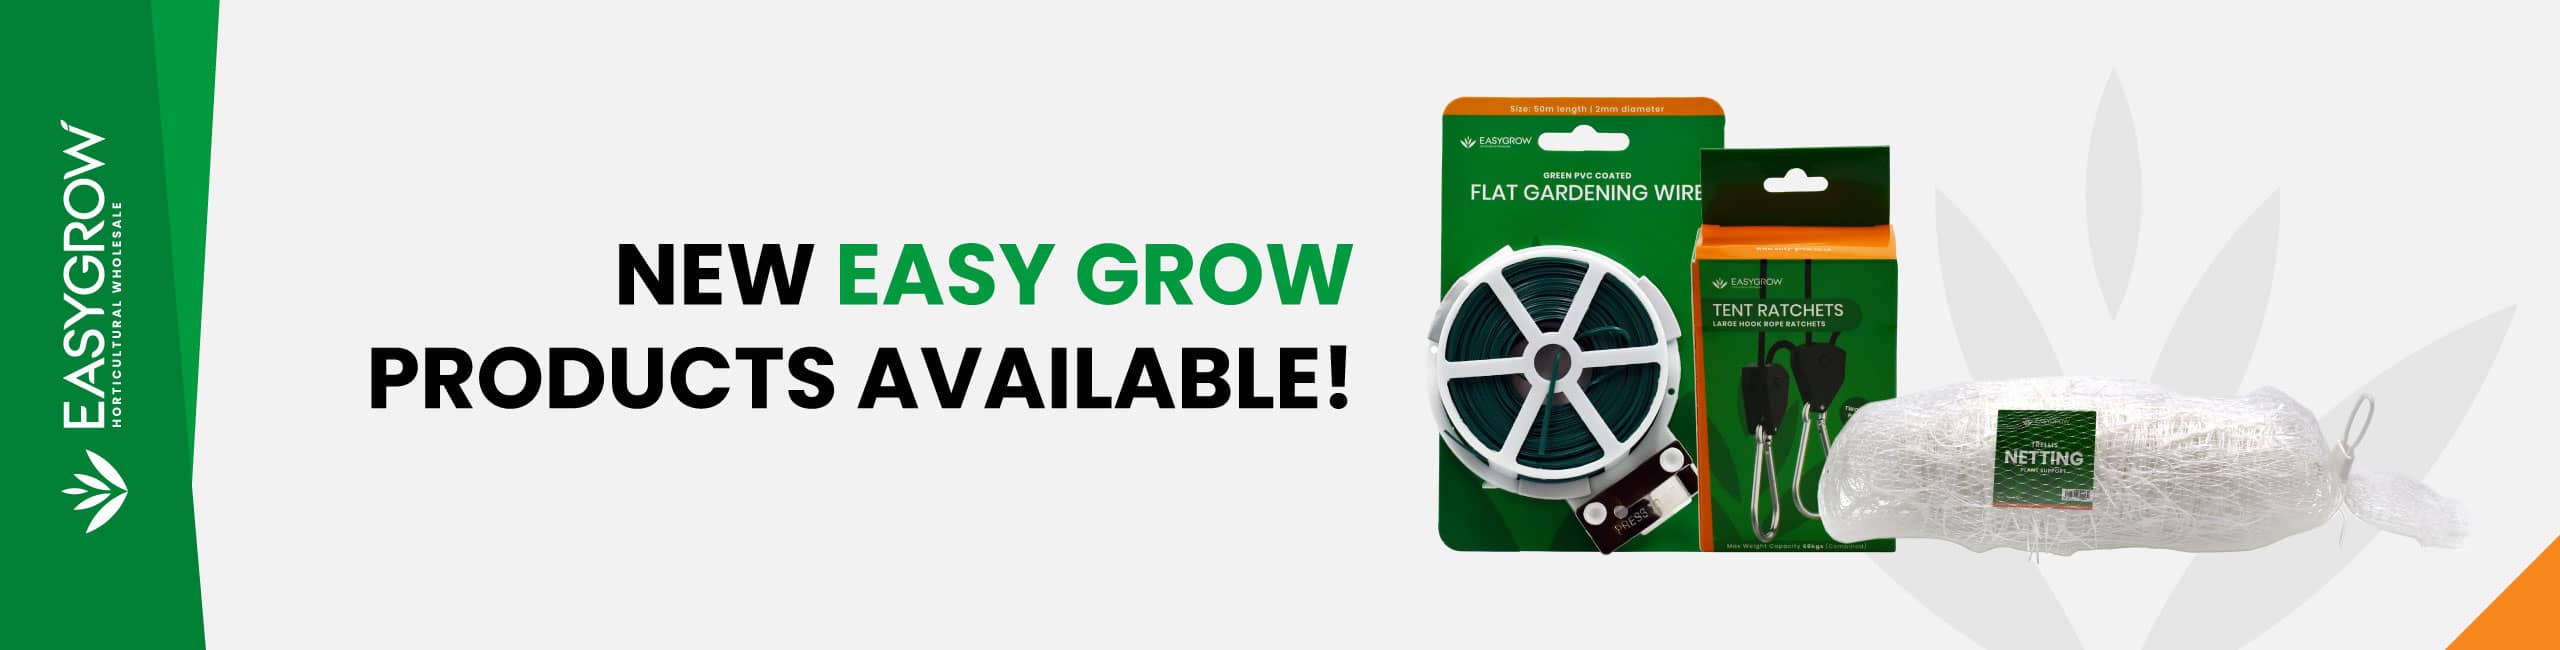 Easy Grow Horticultural Equipment